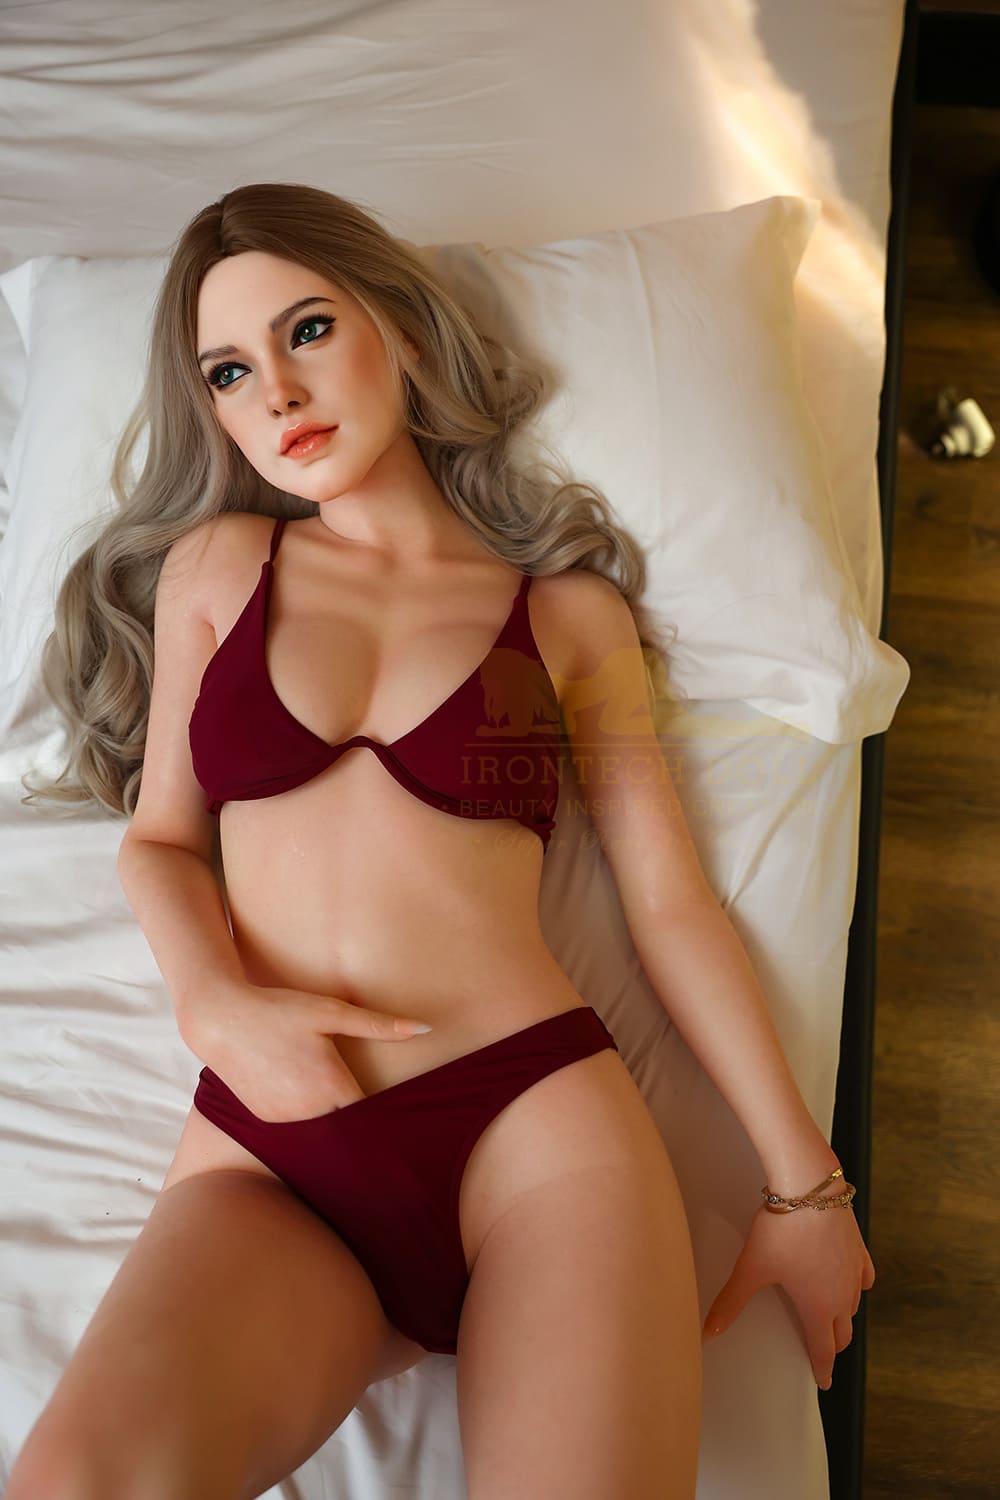 163cm / 5ft4 Blonde B-cup Silicone Small Chest Sex Doll - Irontech Doll: Heidi